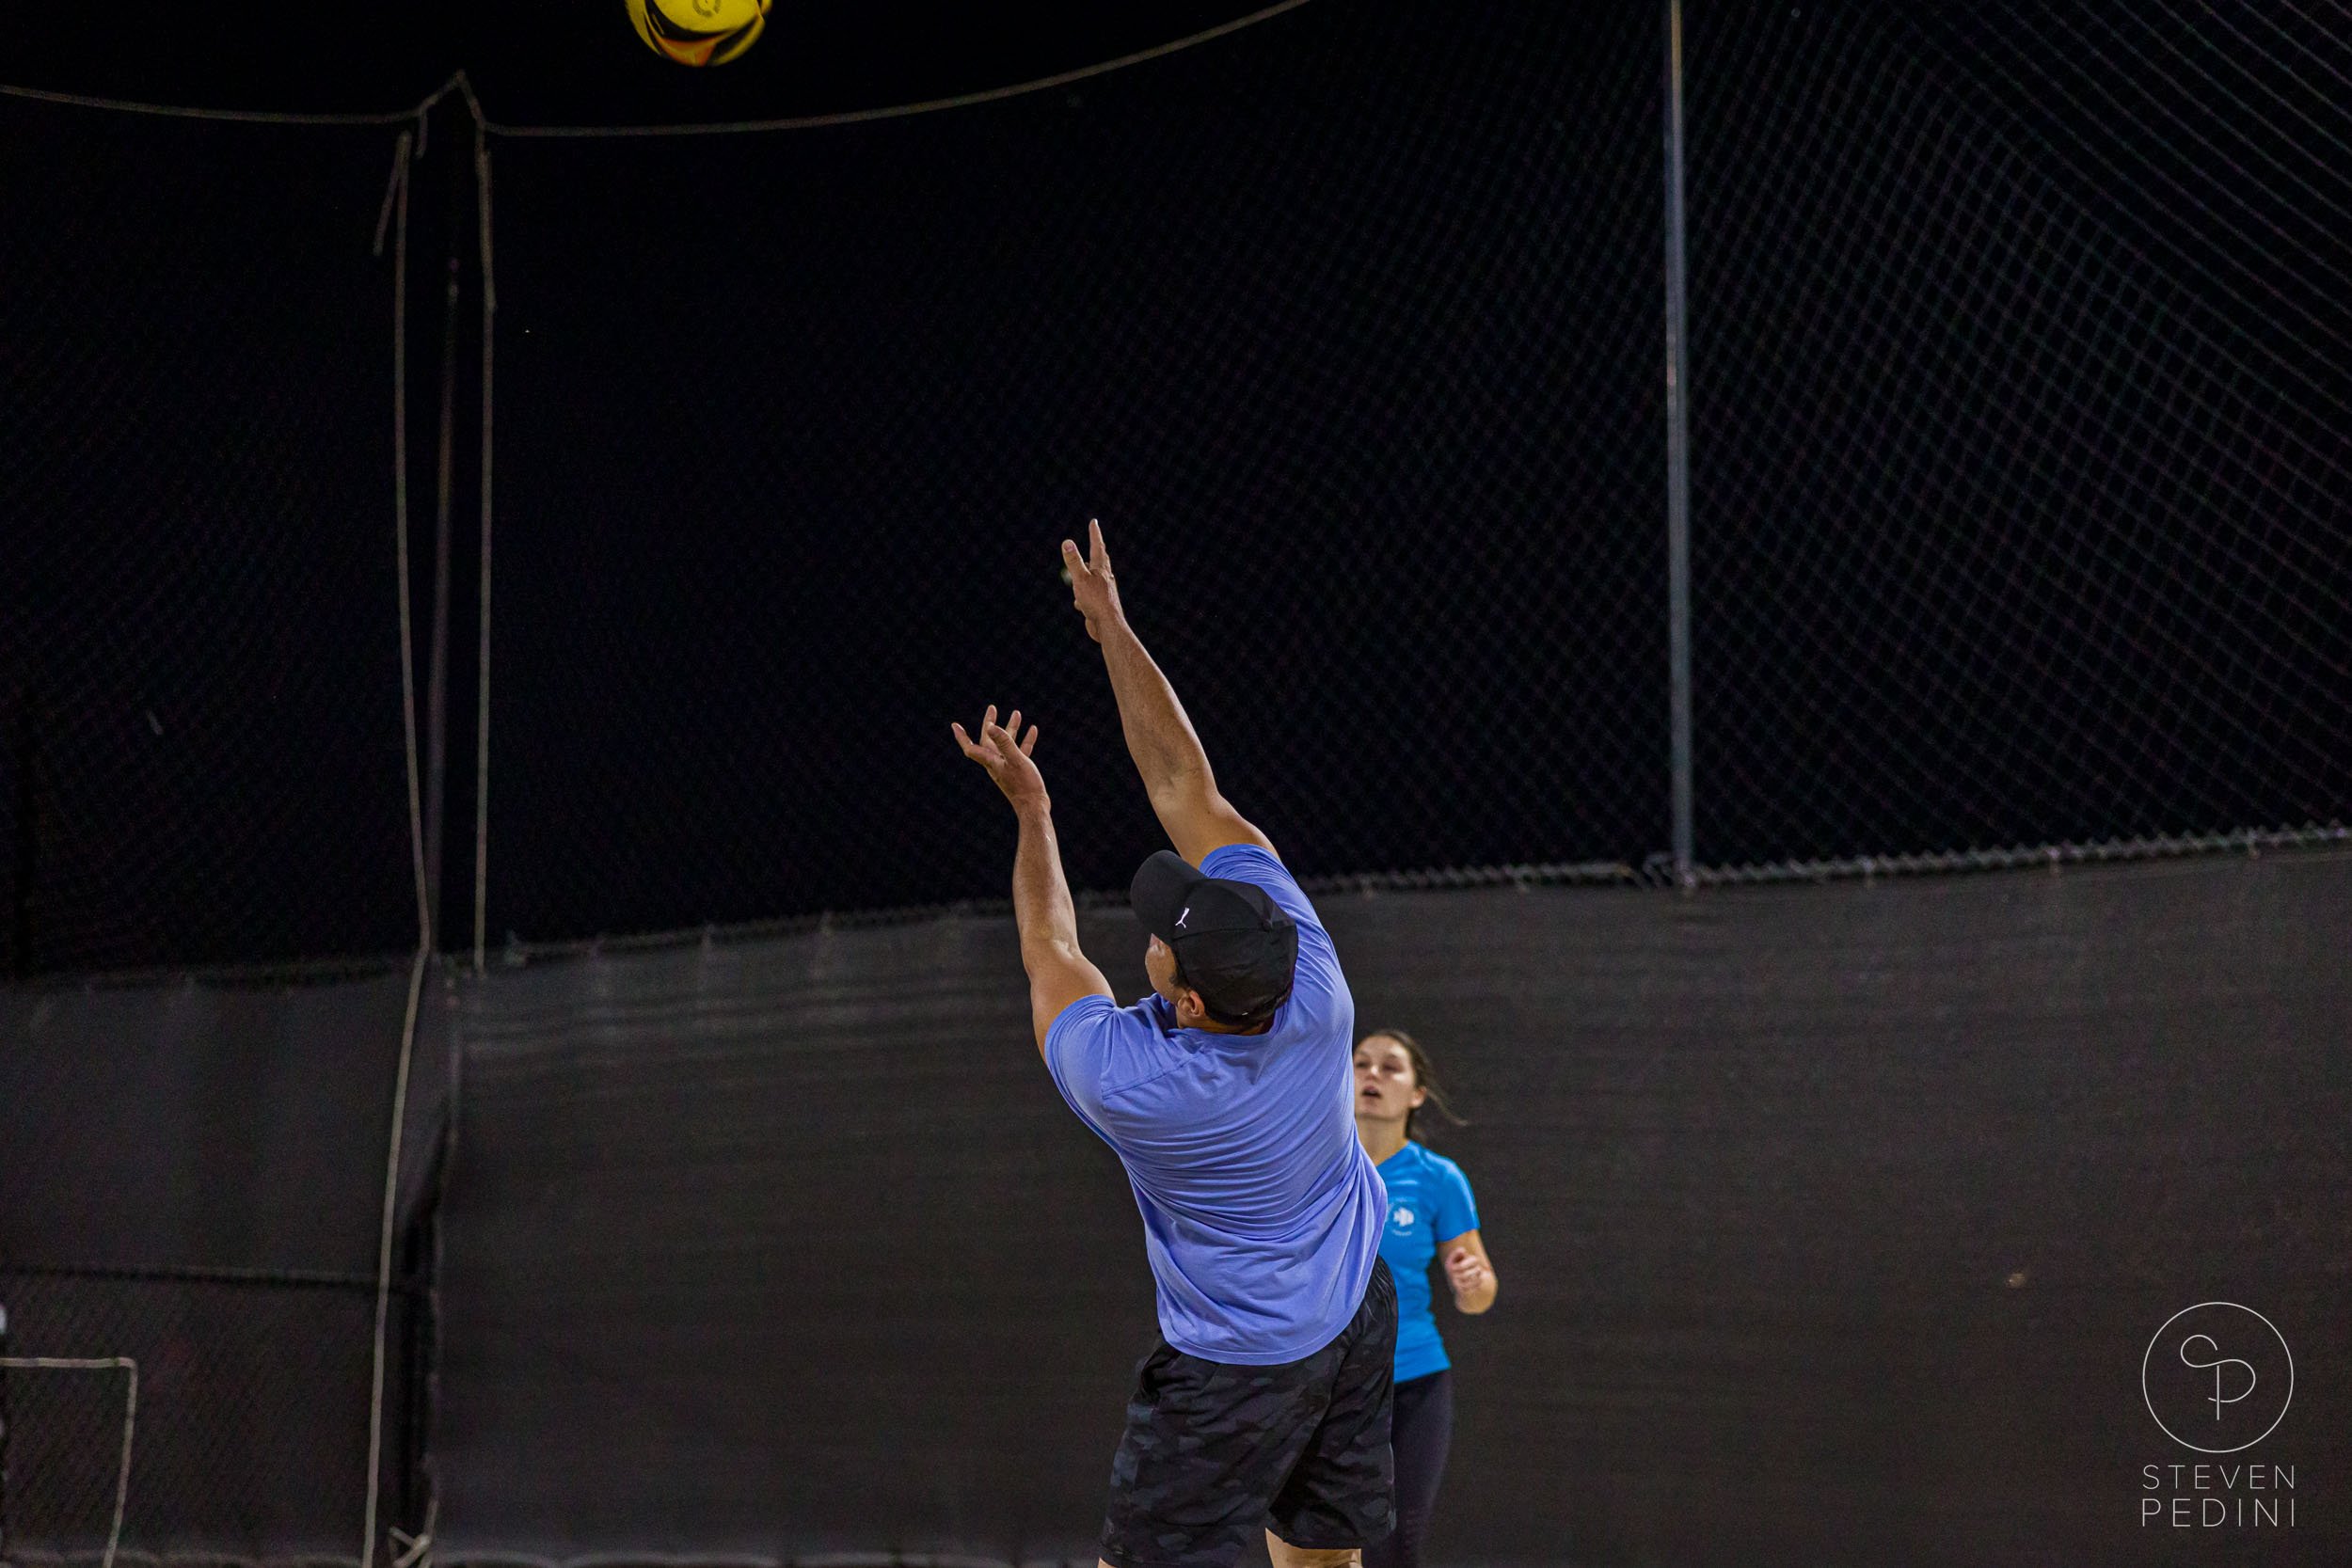 Steven Pedini Photography - Bumpy Pickle - Sand Volleyball - Houston TX - World Cup of Volleyball - 00377.jpg